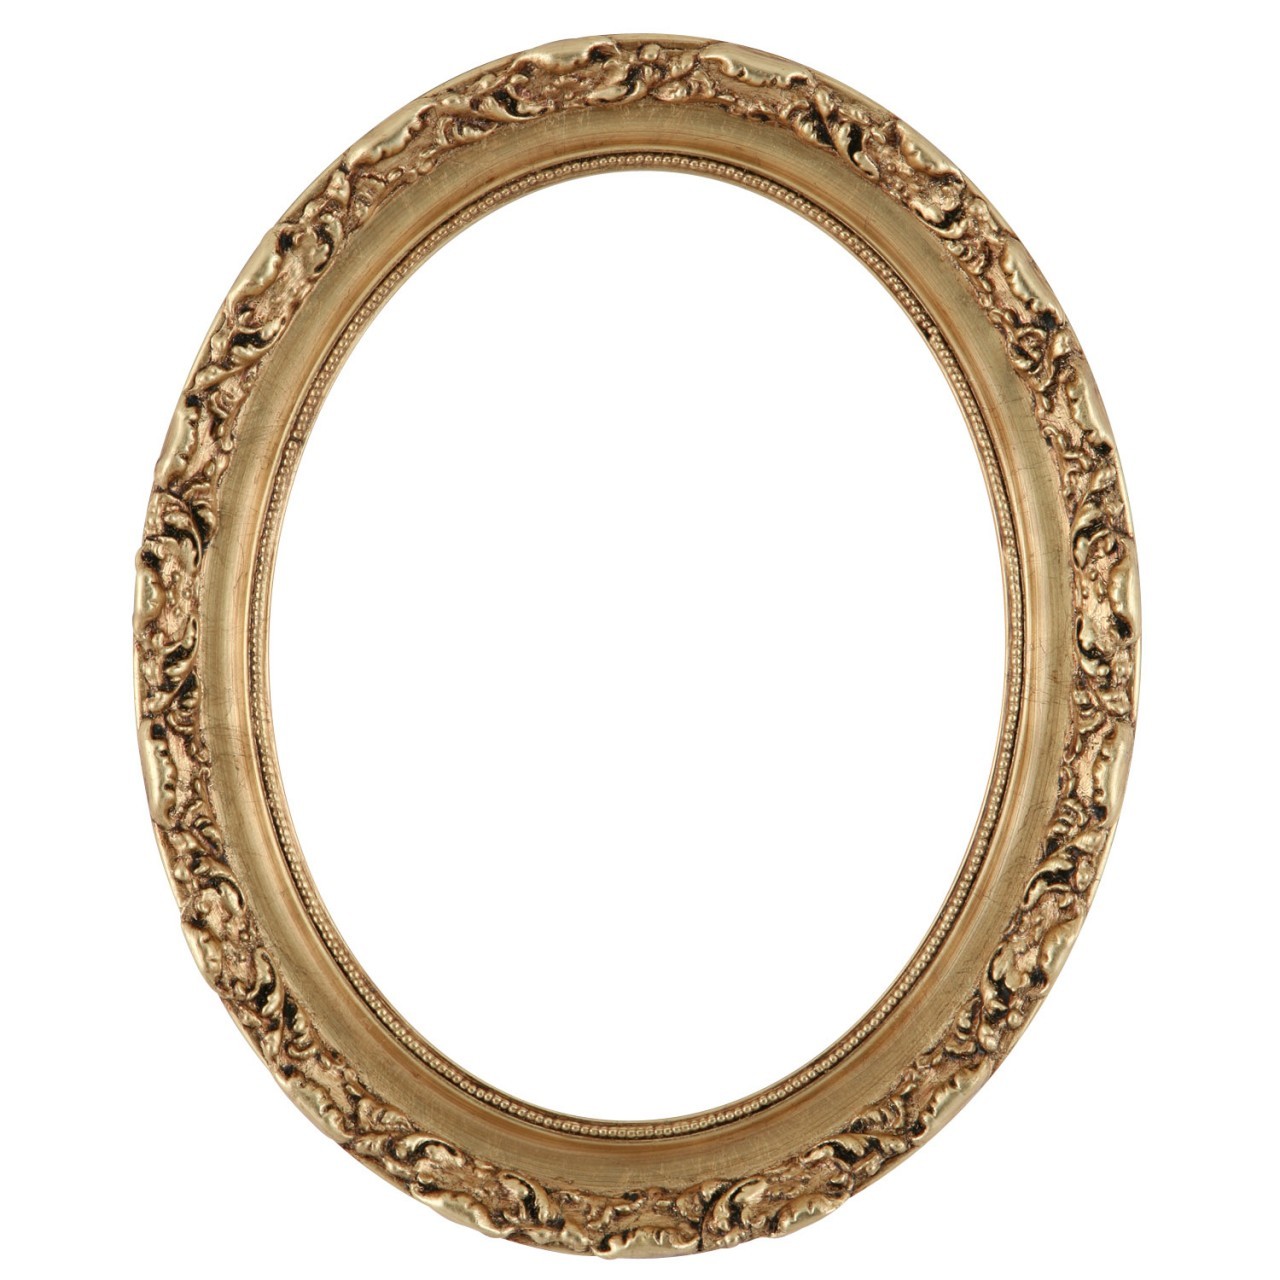 Oval Picture Frames | Shop for Antique, Wooden Picture Frames